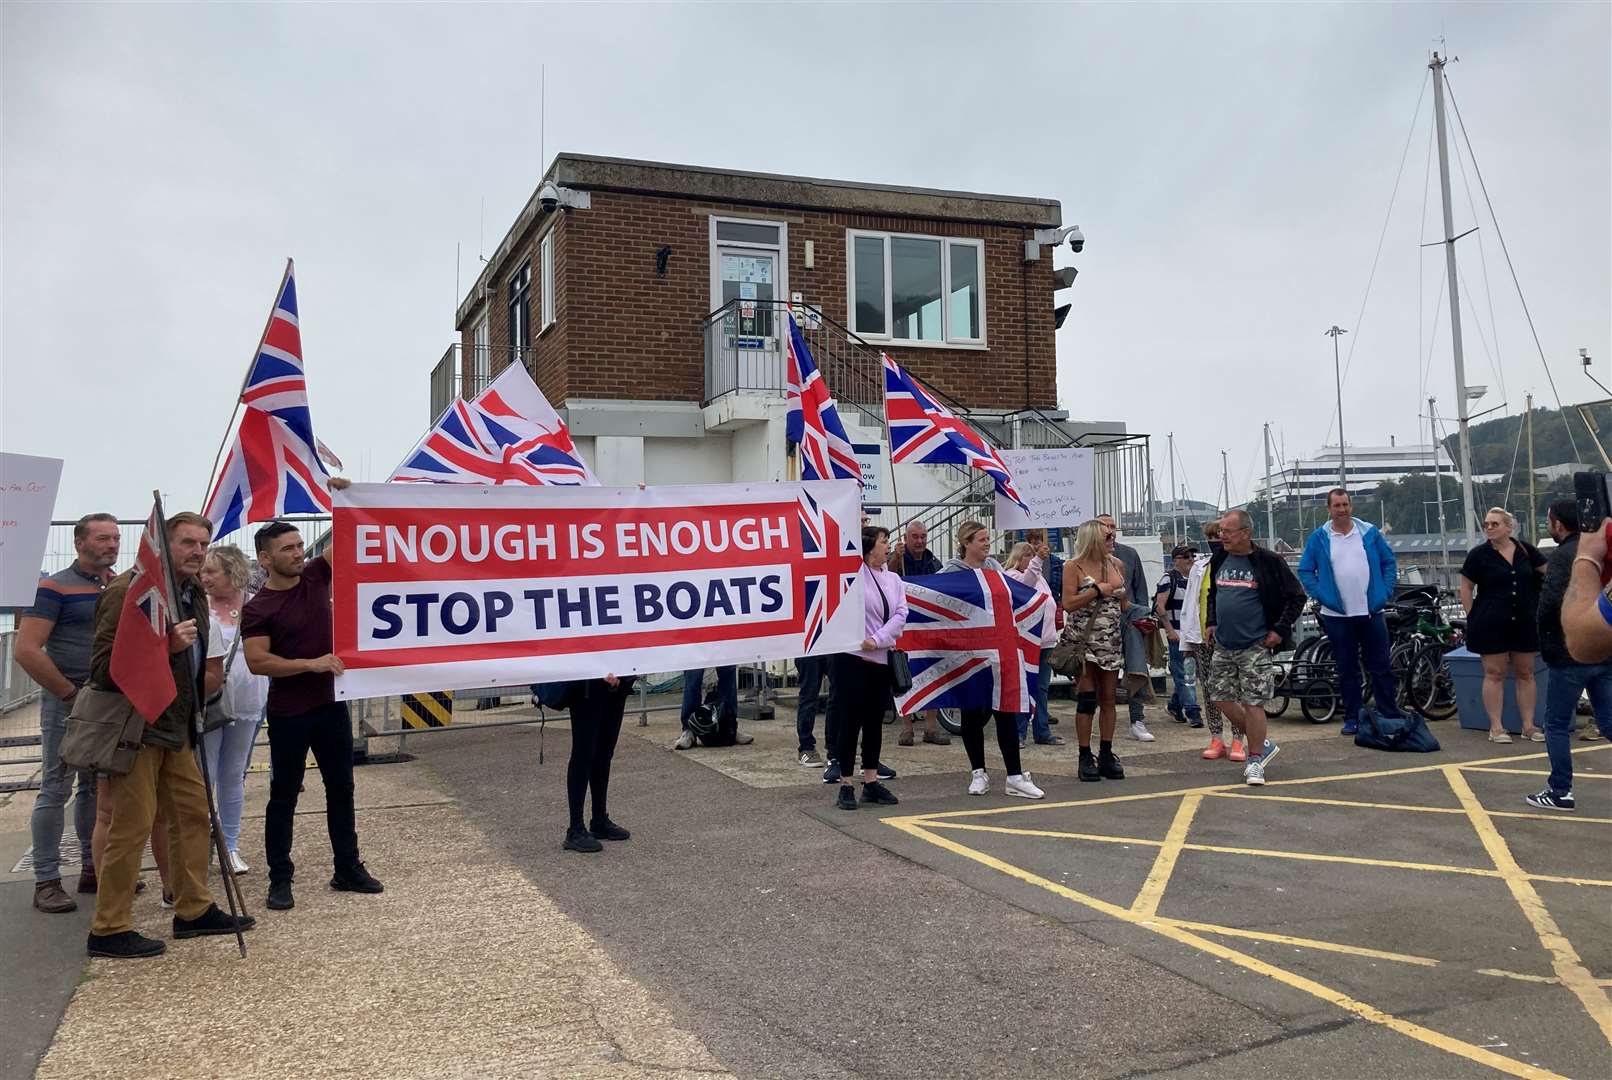 In September last year, police were in attendance at Dover marina as anti-immigration groups and counter-protesters went head-to-head